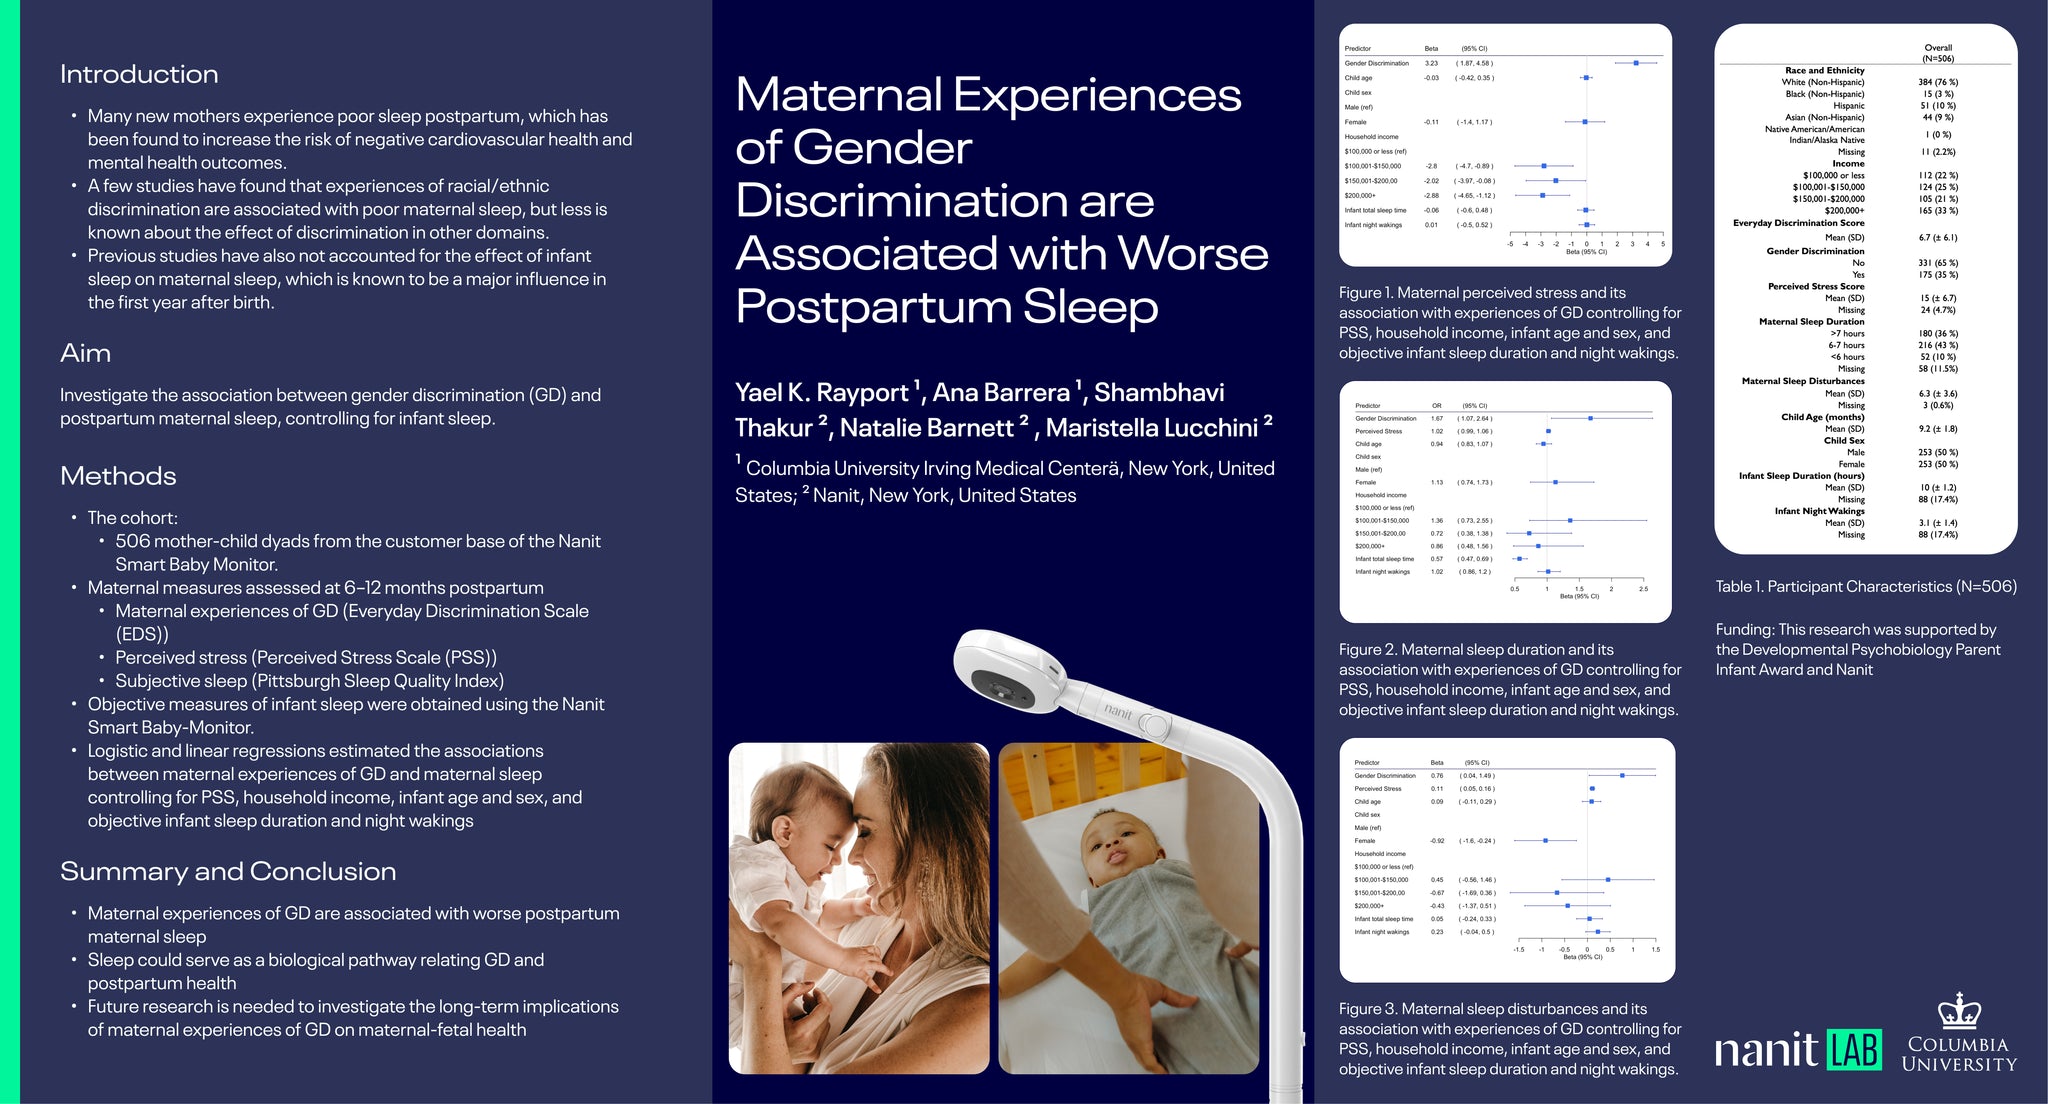 Maternal Experiences of Gender Discrimination are Associated with Worse Postpartum Sleep